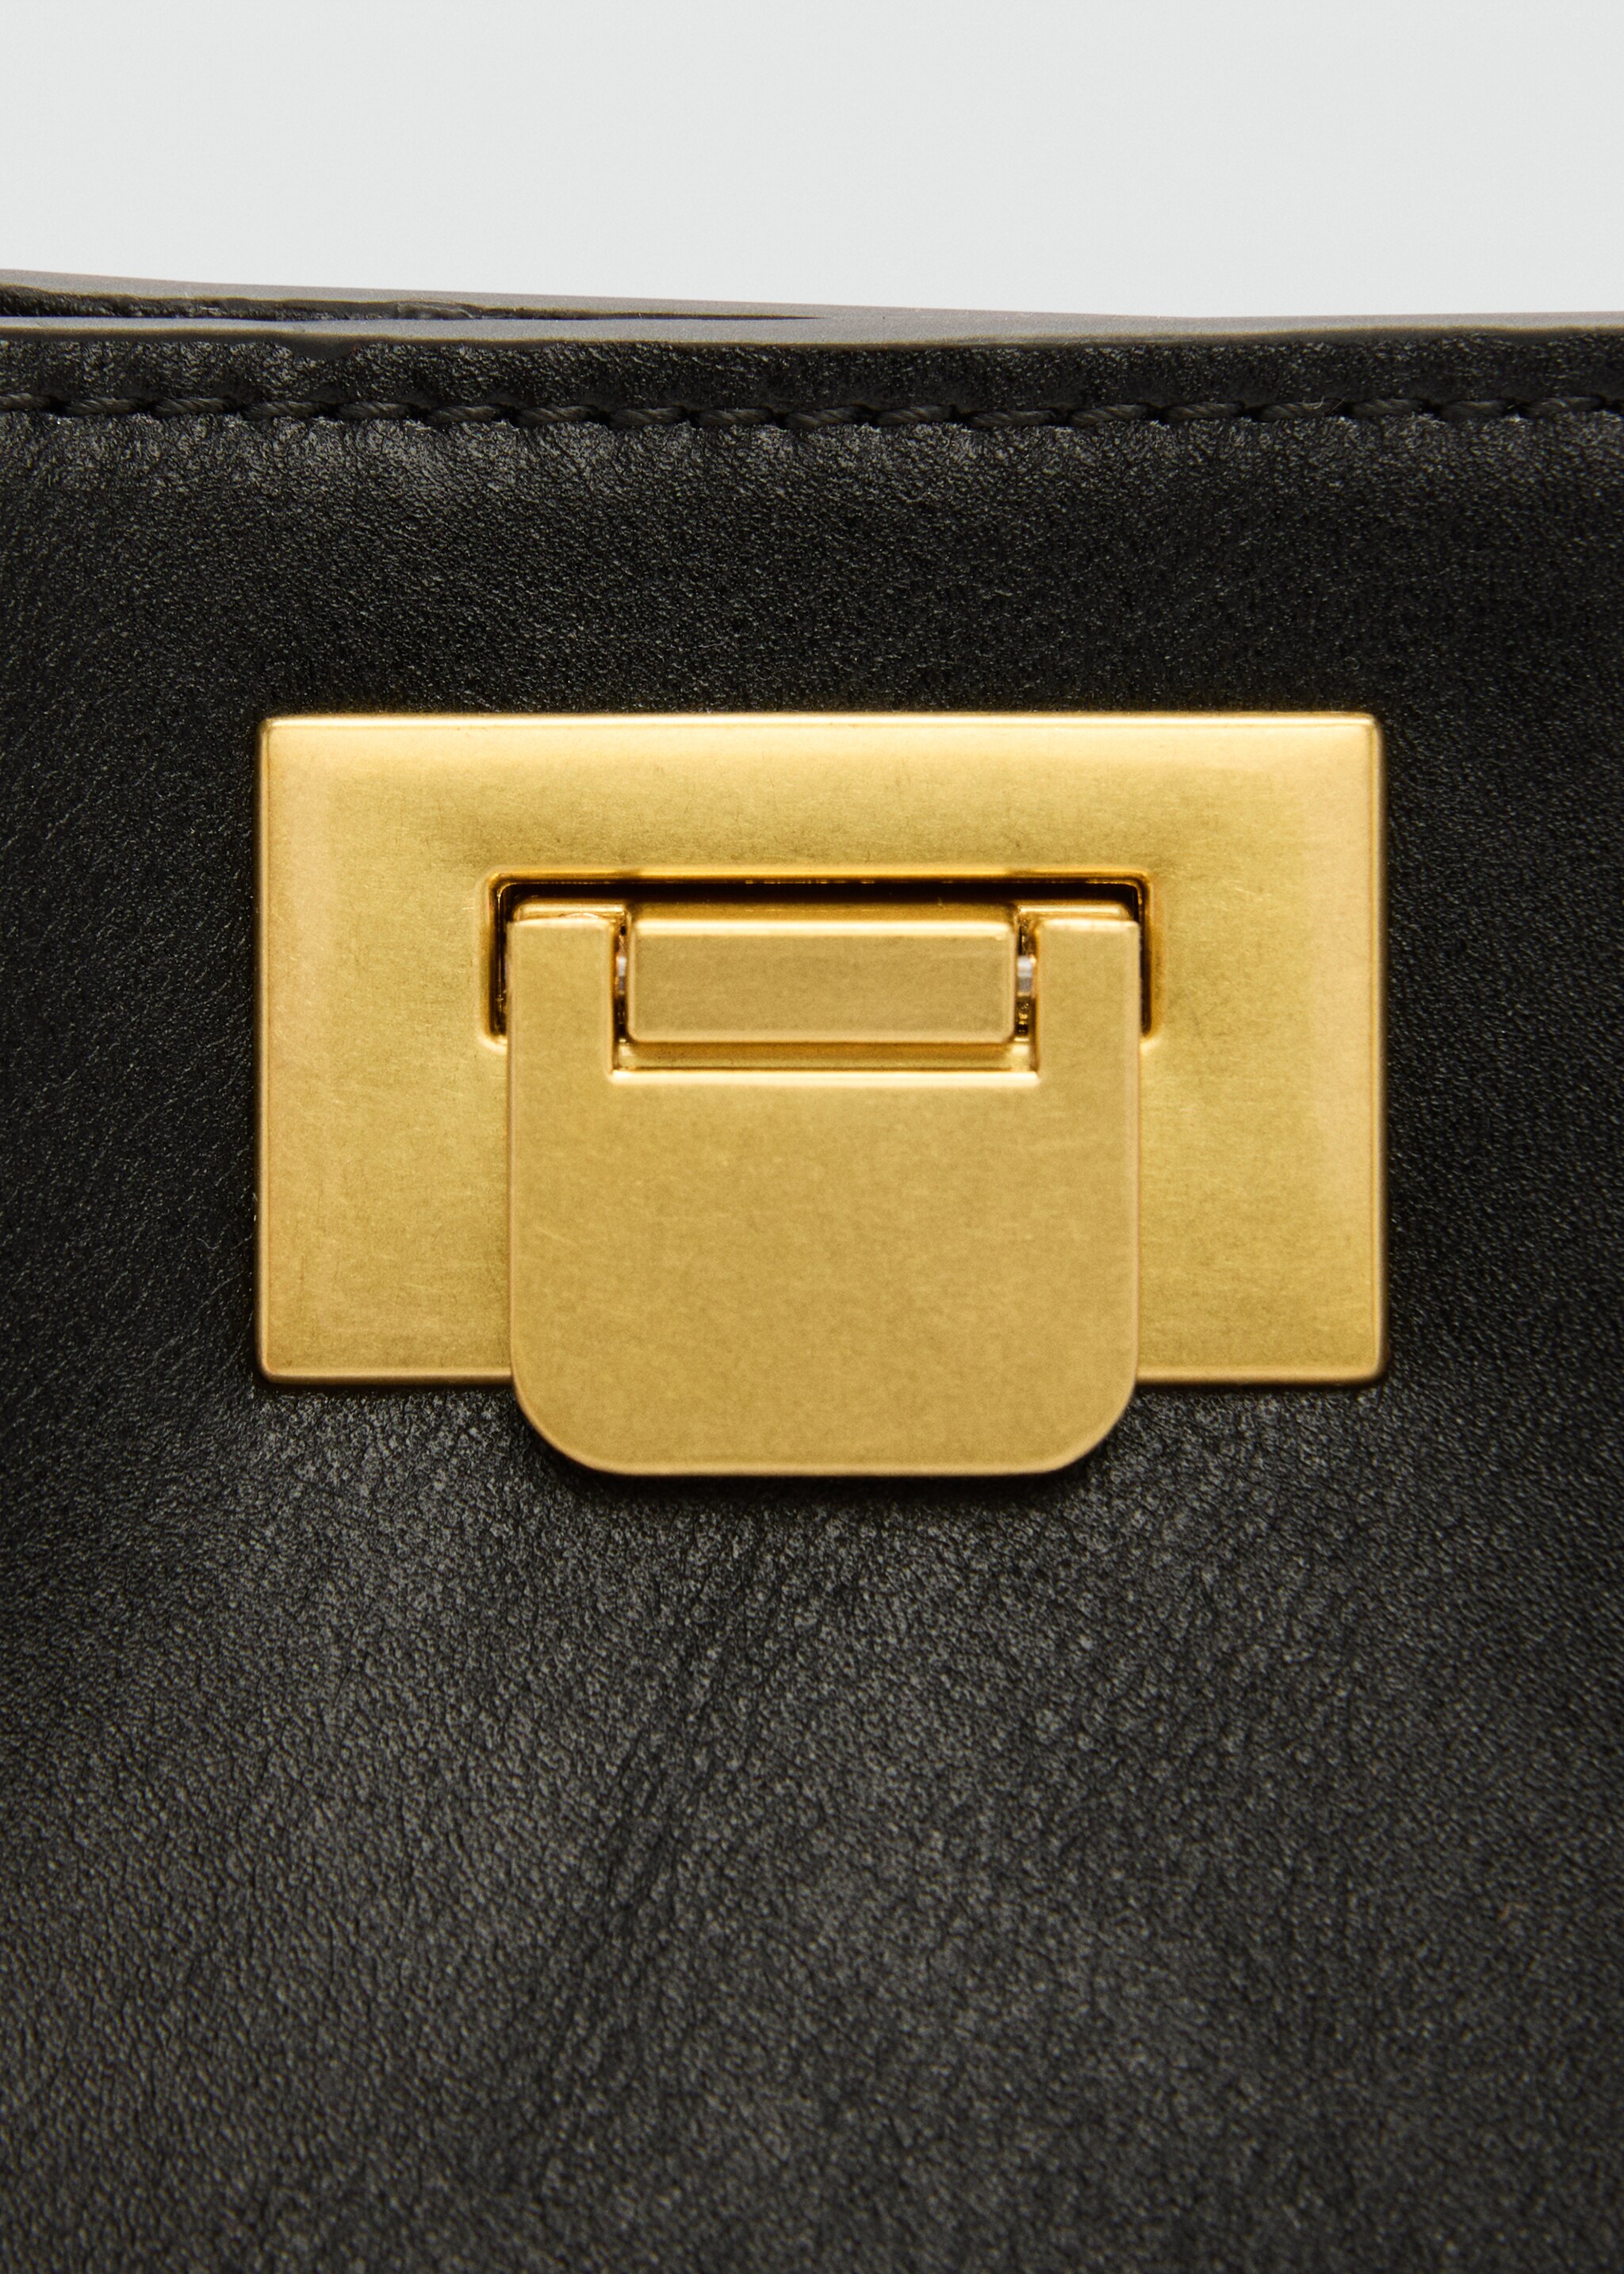 Shopper bag with padlock - Details of the article 2